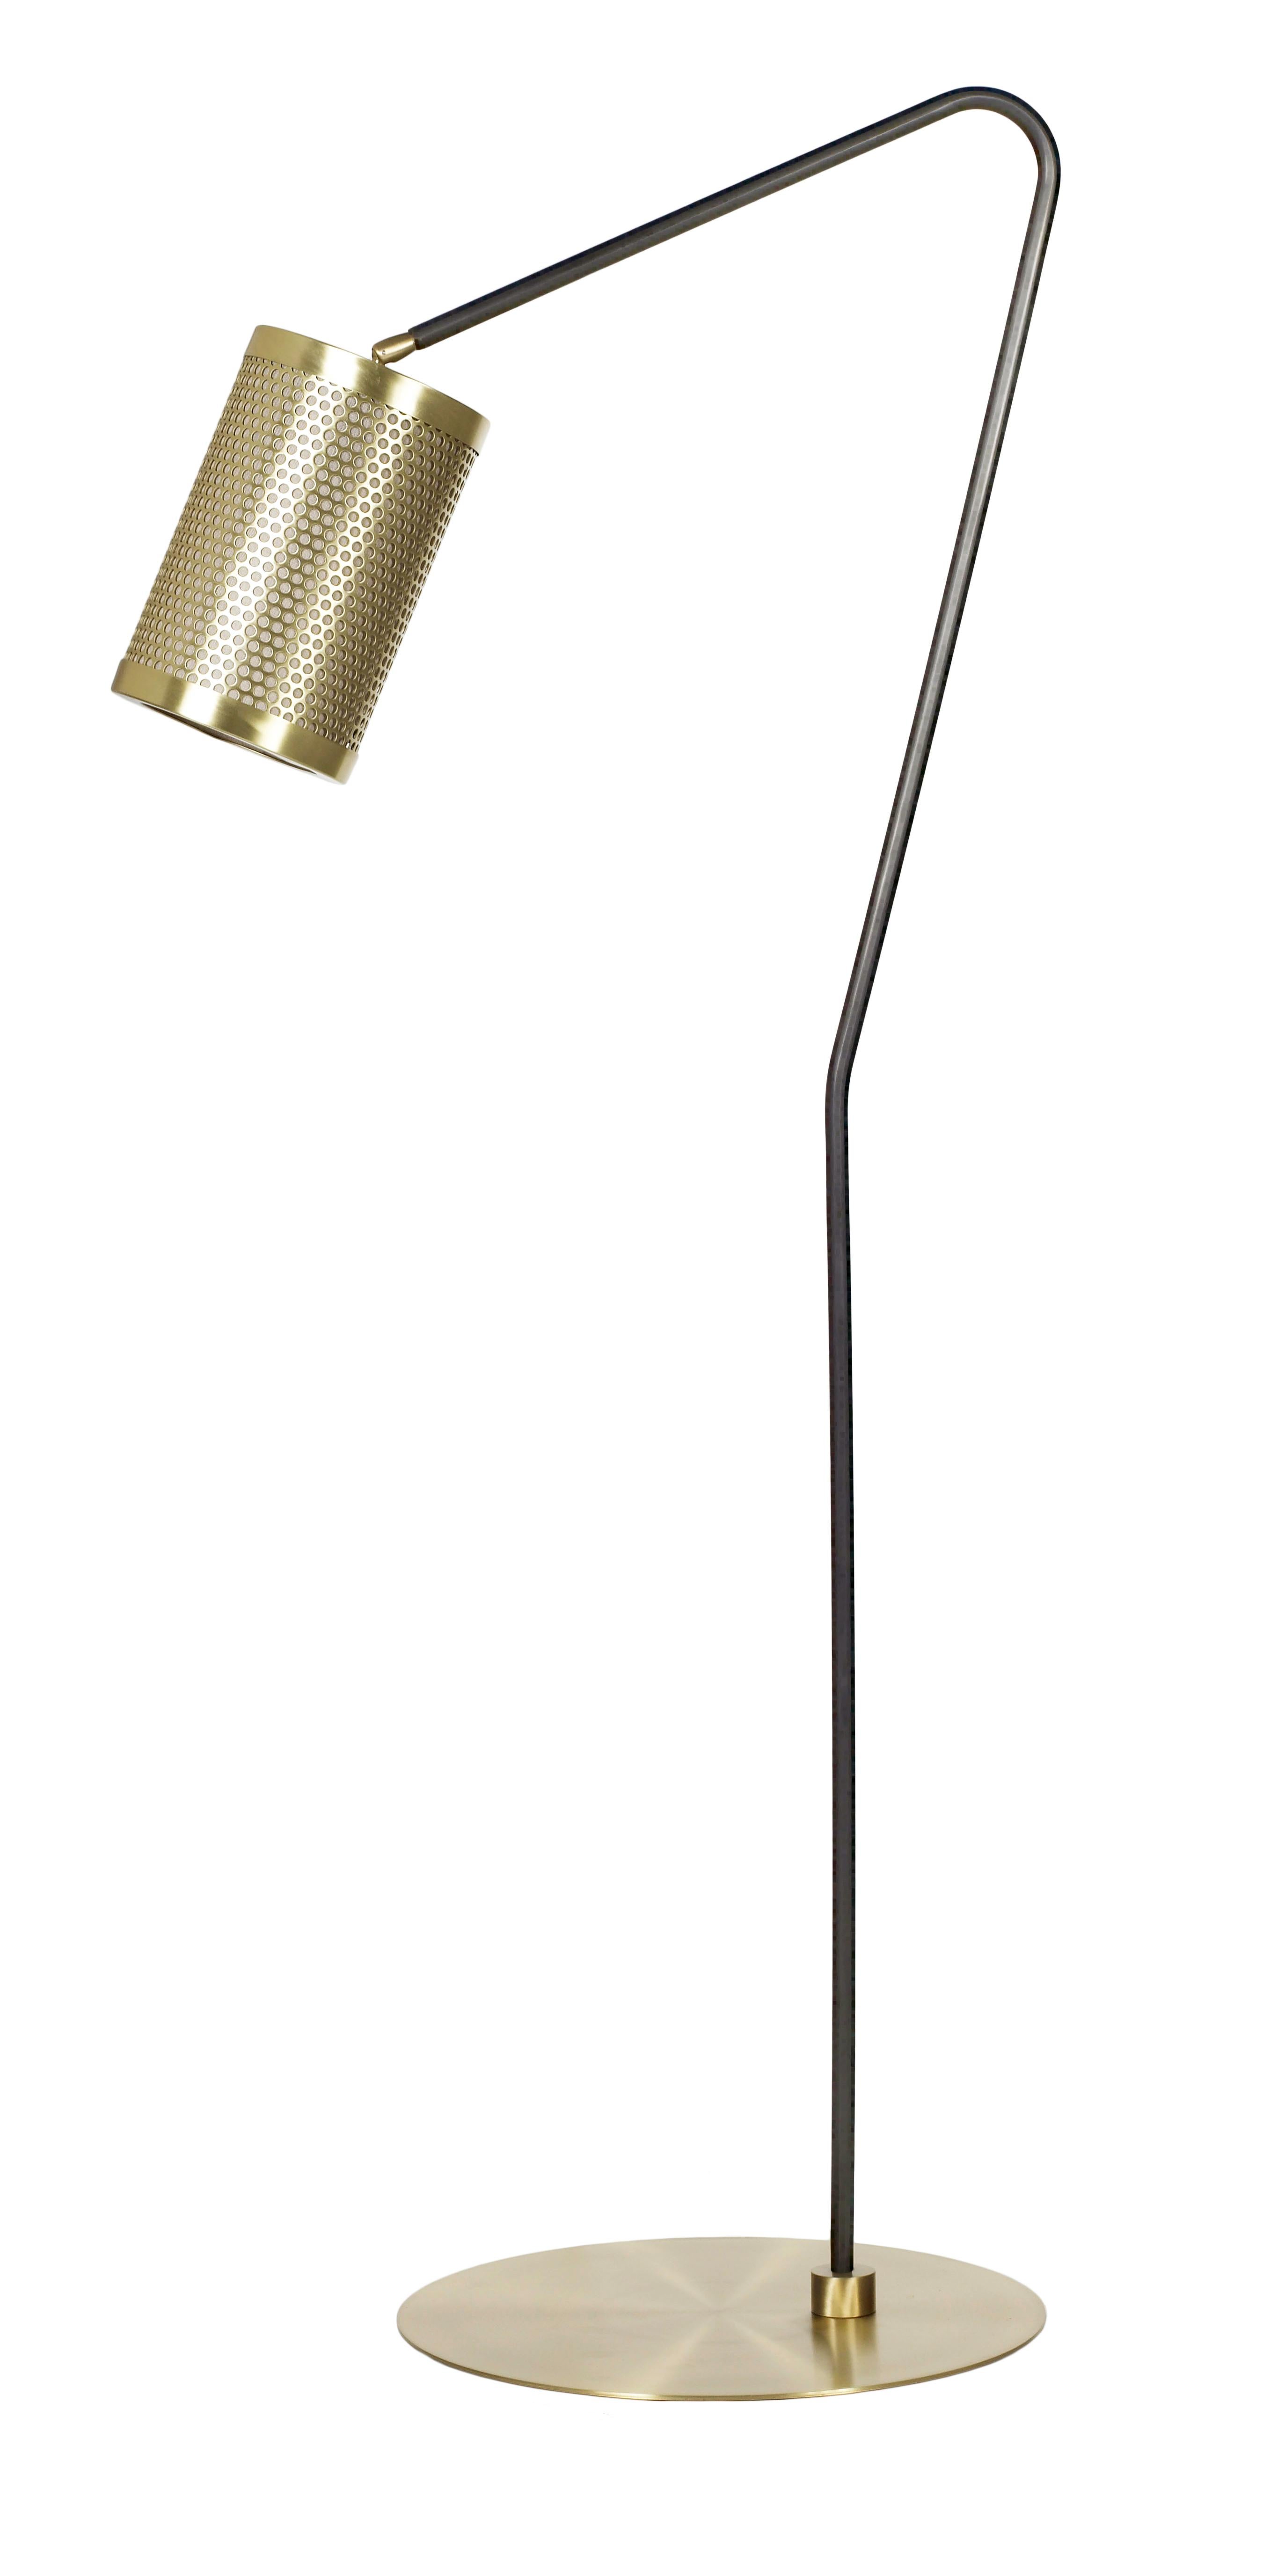 Pierre floor lamp by CTO Lighting.
Materials: bronze with satin brass base, satin brass perforated drum shade.
Dimensions: H 141 x W 58 cm.

All our lamps can be wired according to each country. If sold to the USA it will be wired for the USA